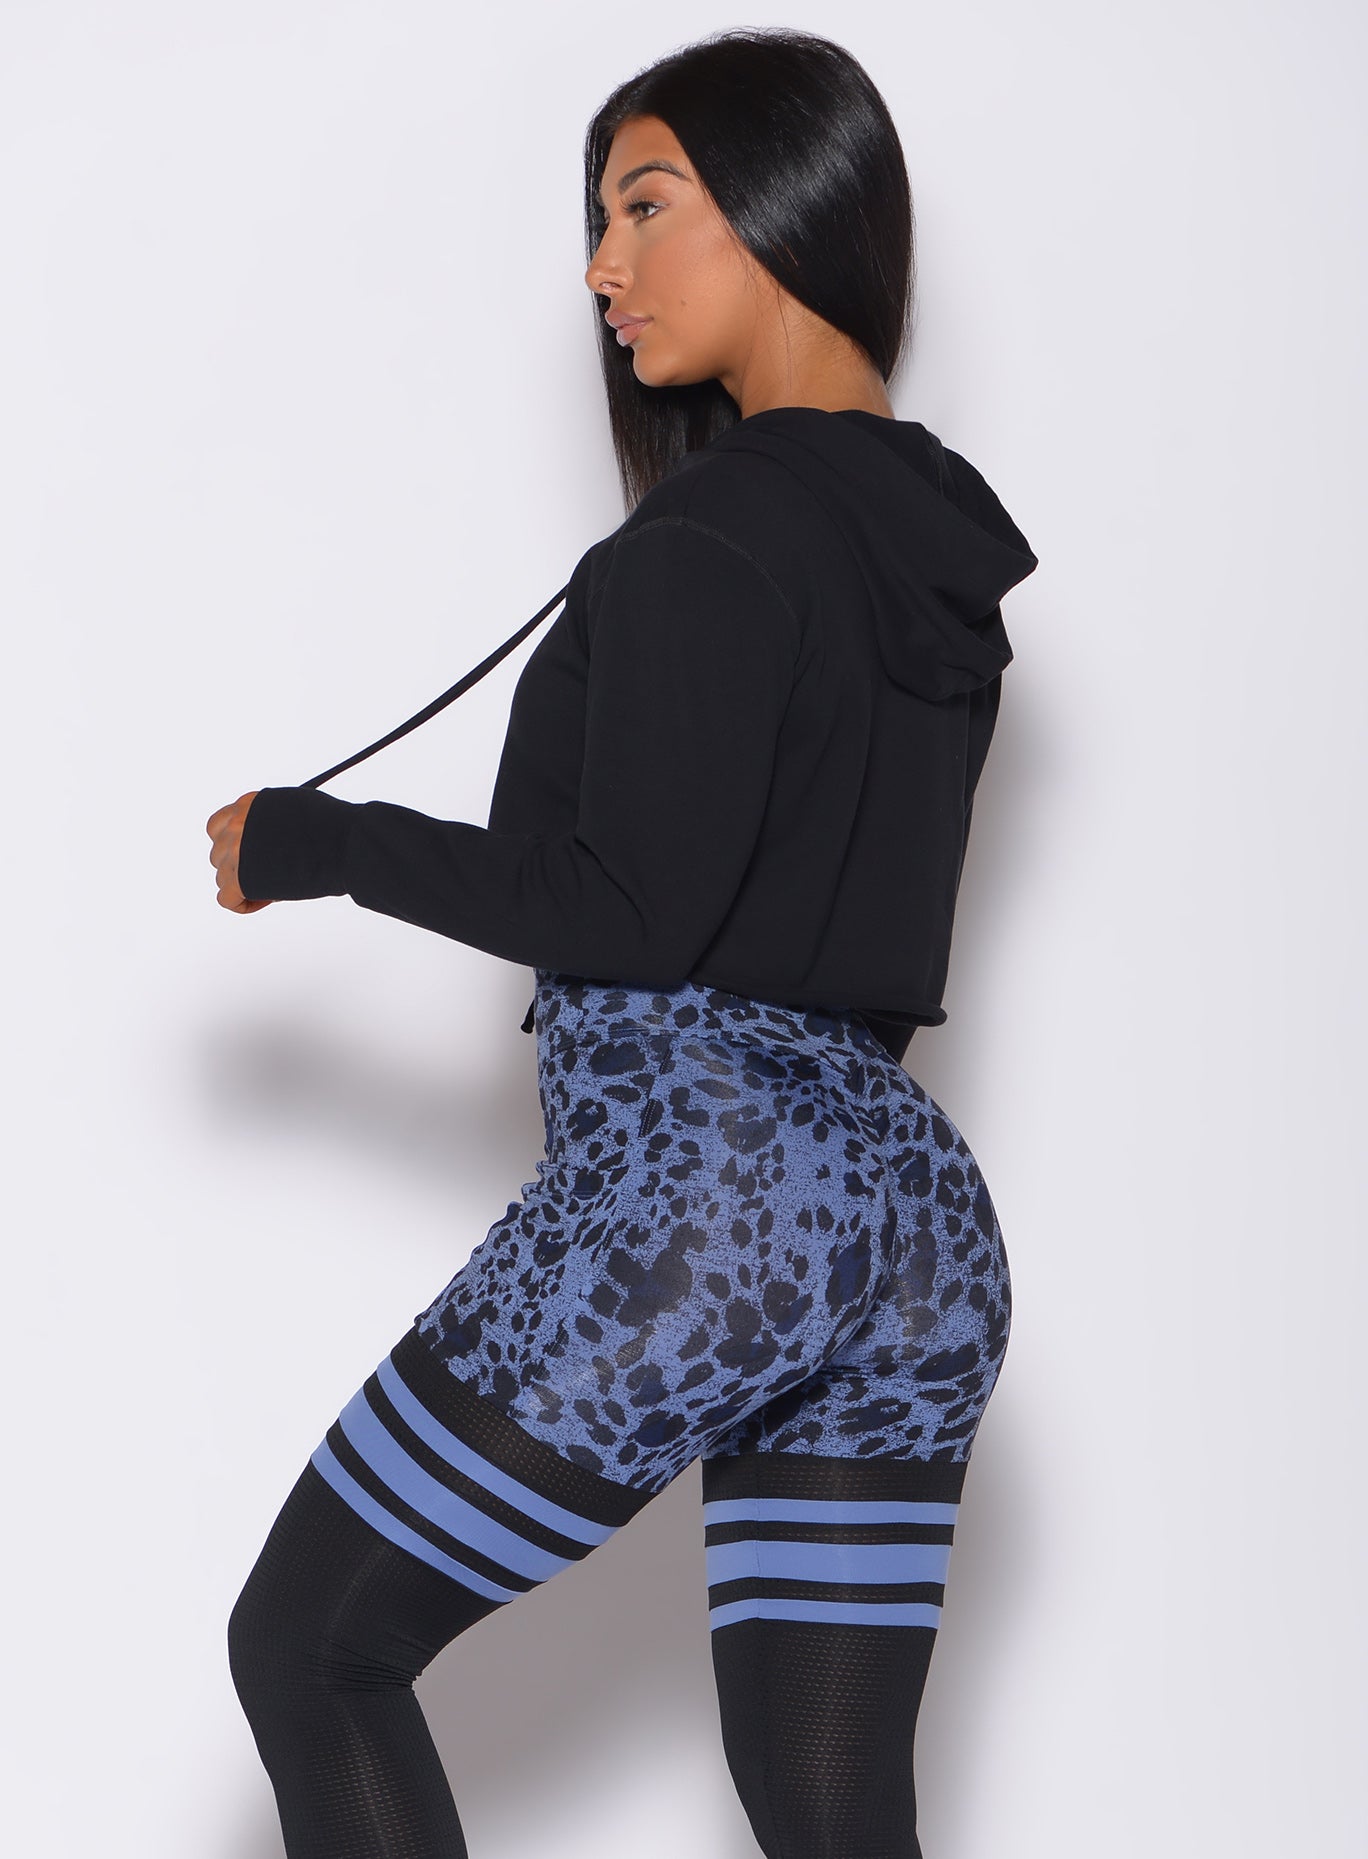 Left side  profile view of a model in our black bombshell hoodie and a cheetah print leggings